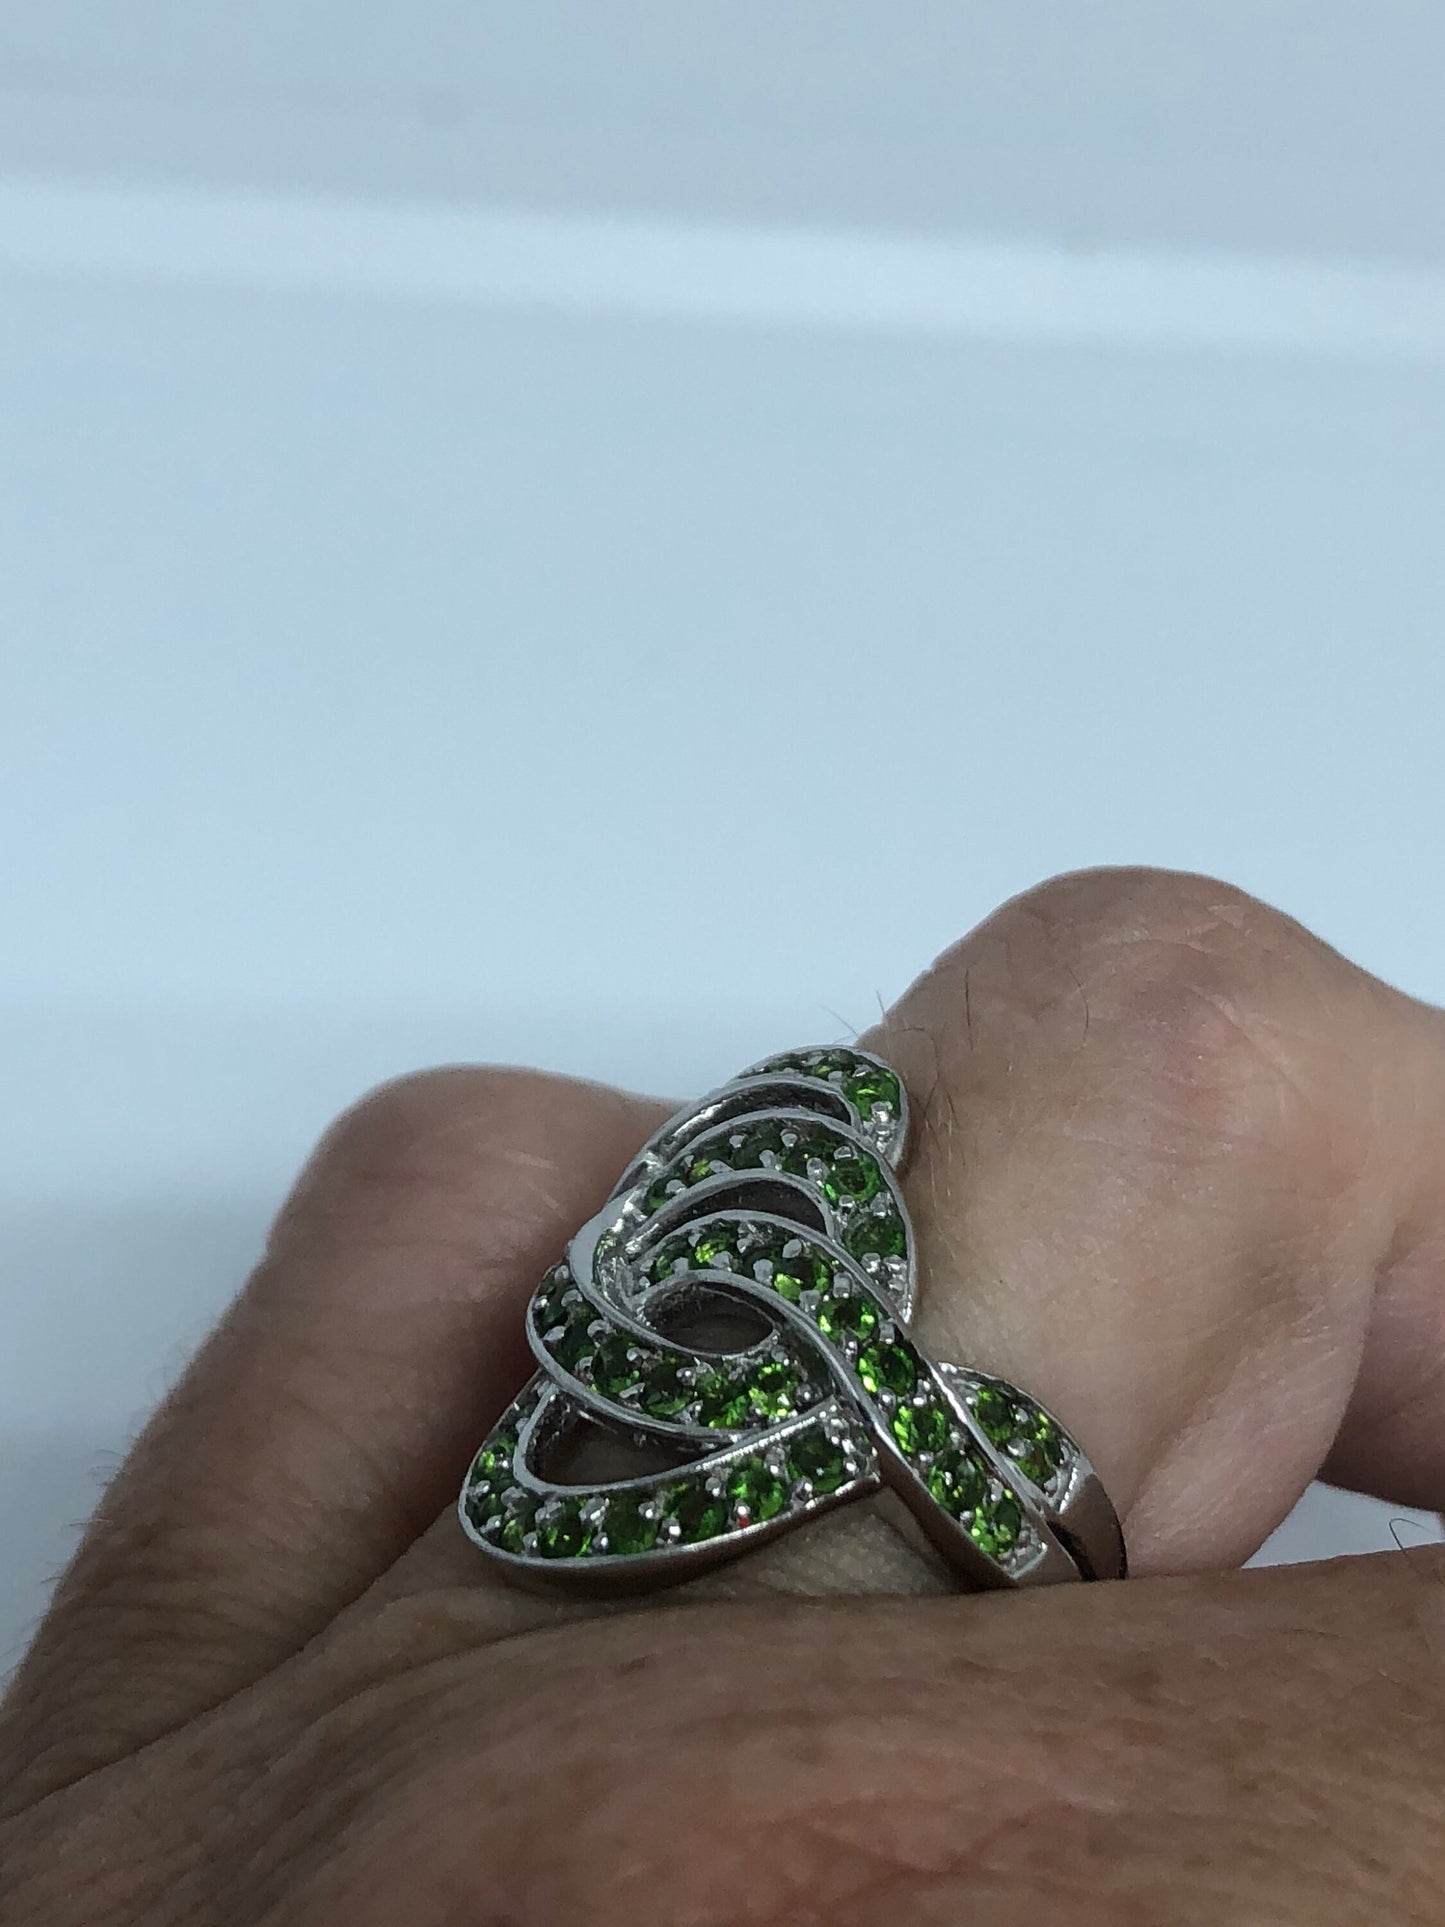 Vintage Handmade Genuine Green Chrome Diopside Filigree Setting 925 Sterling Silver Gothic Knot Ring